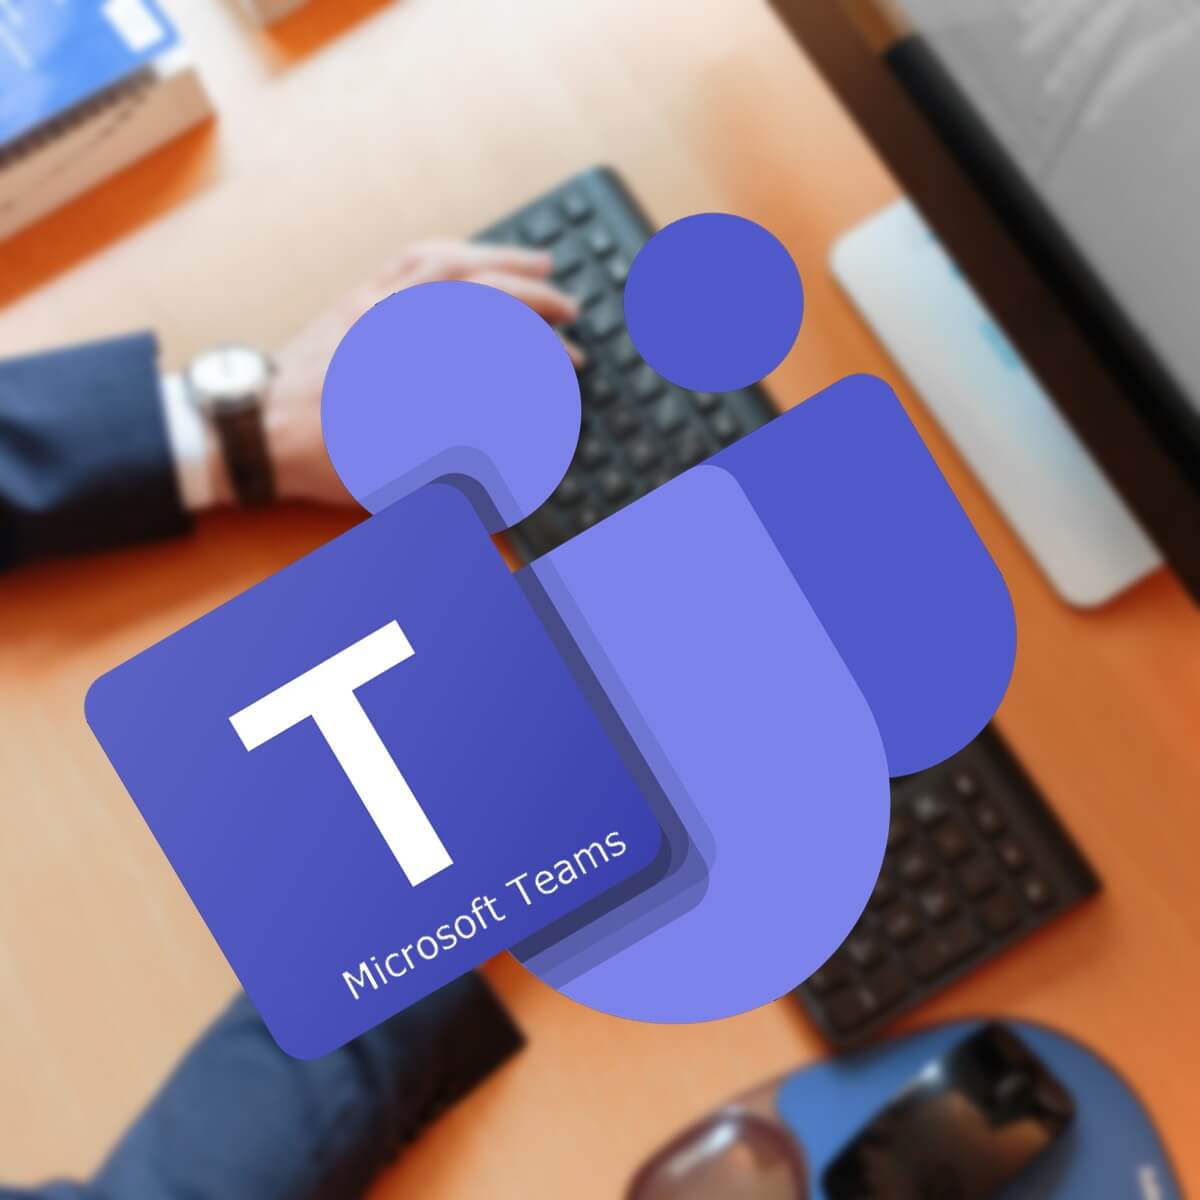 automatic Do not disturb in Microsoft Teams